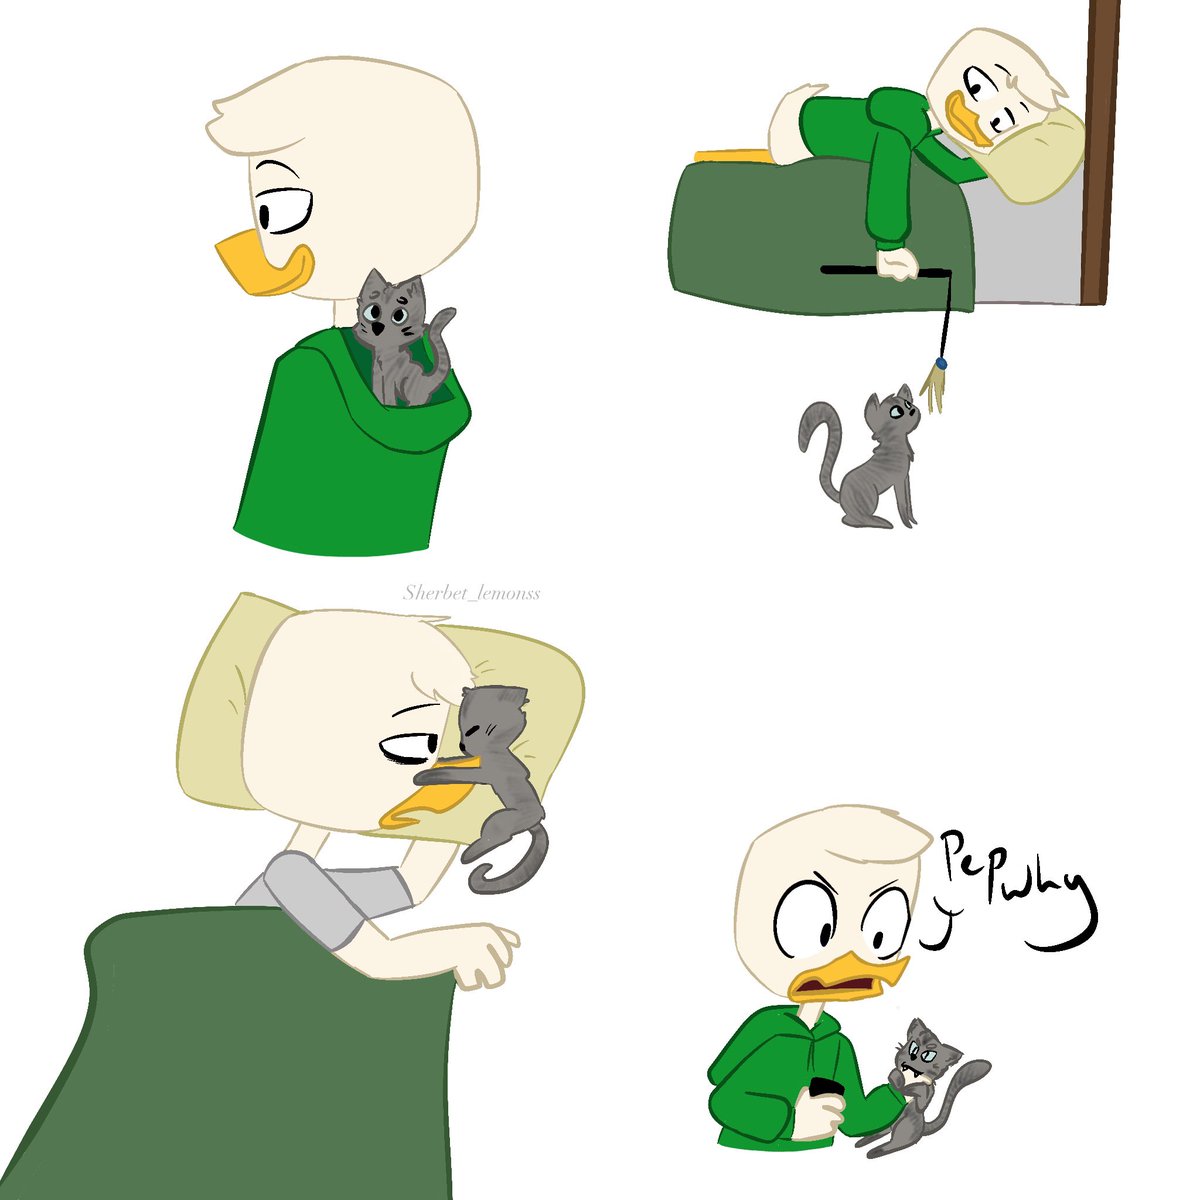 Here’s some long overdue art of Louie and his pet cat Pep idk why I took so long to draw this, I love the headcanon sm (idea by @MageSolace ) #ducktales #louieduck